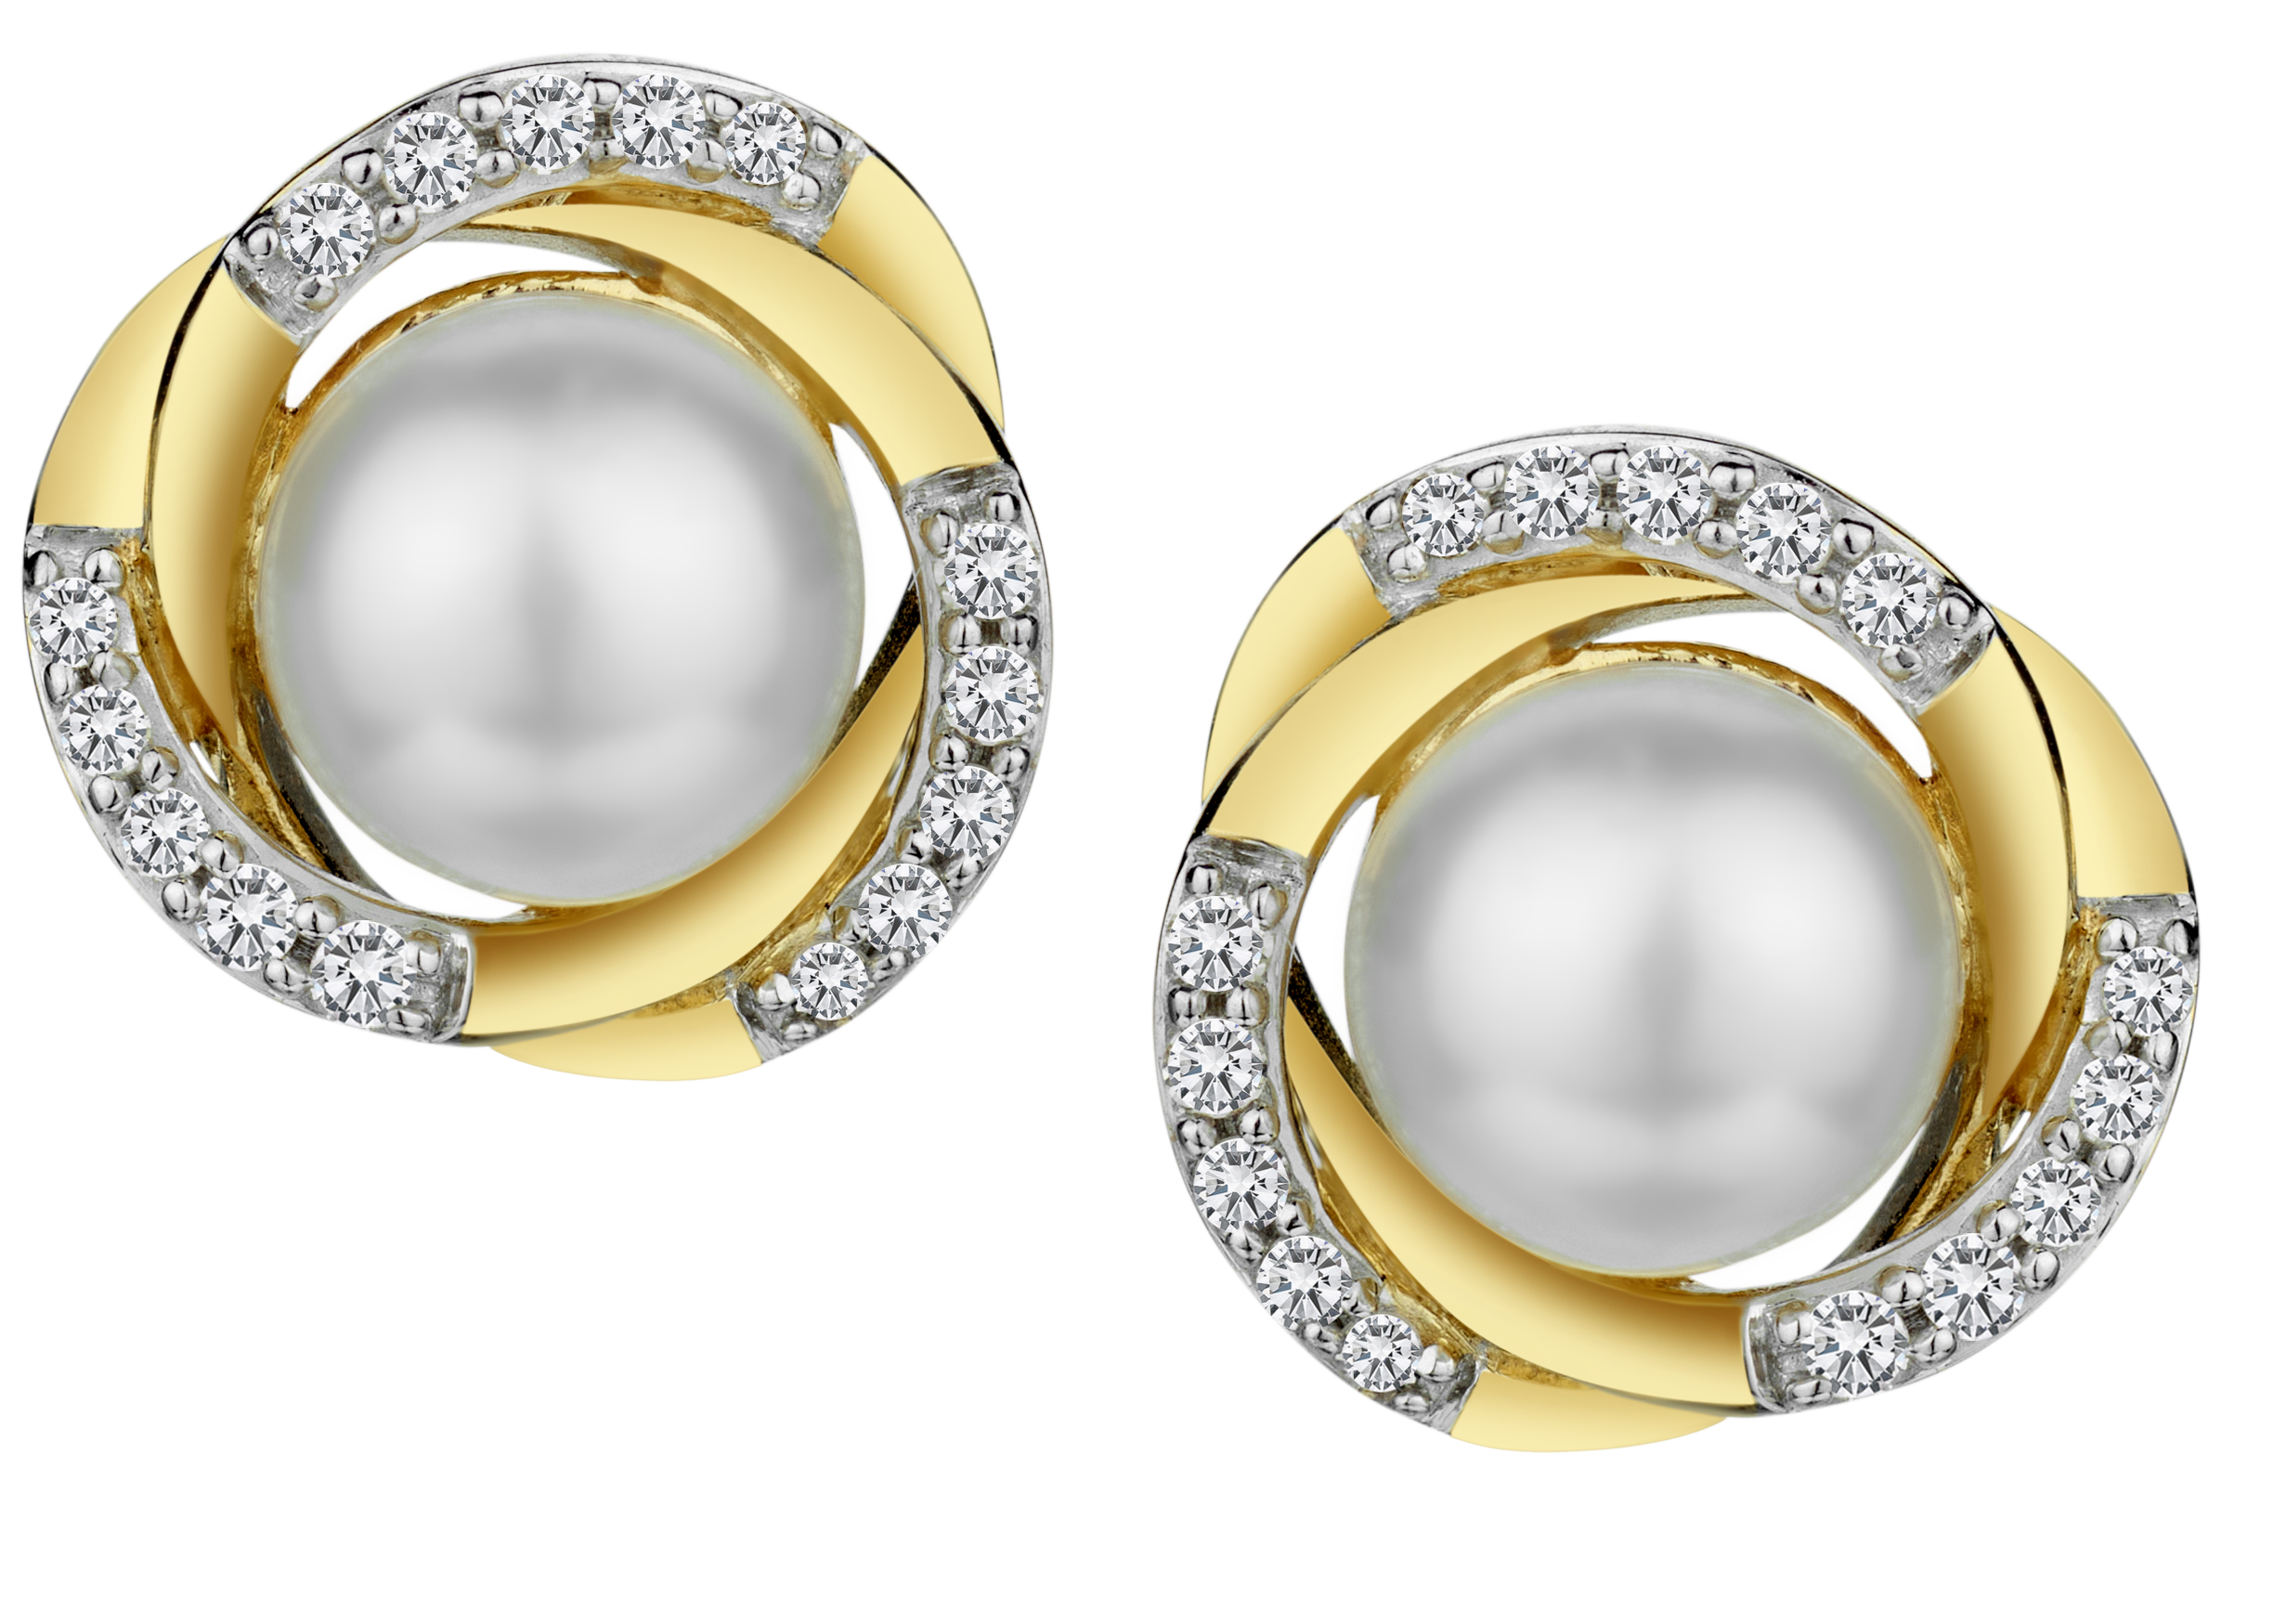 .13 Carat of Diamonds & Genuine Pearl Earrings, 10kt Yellow Gold.....................NOW